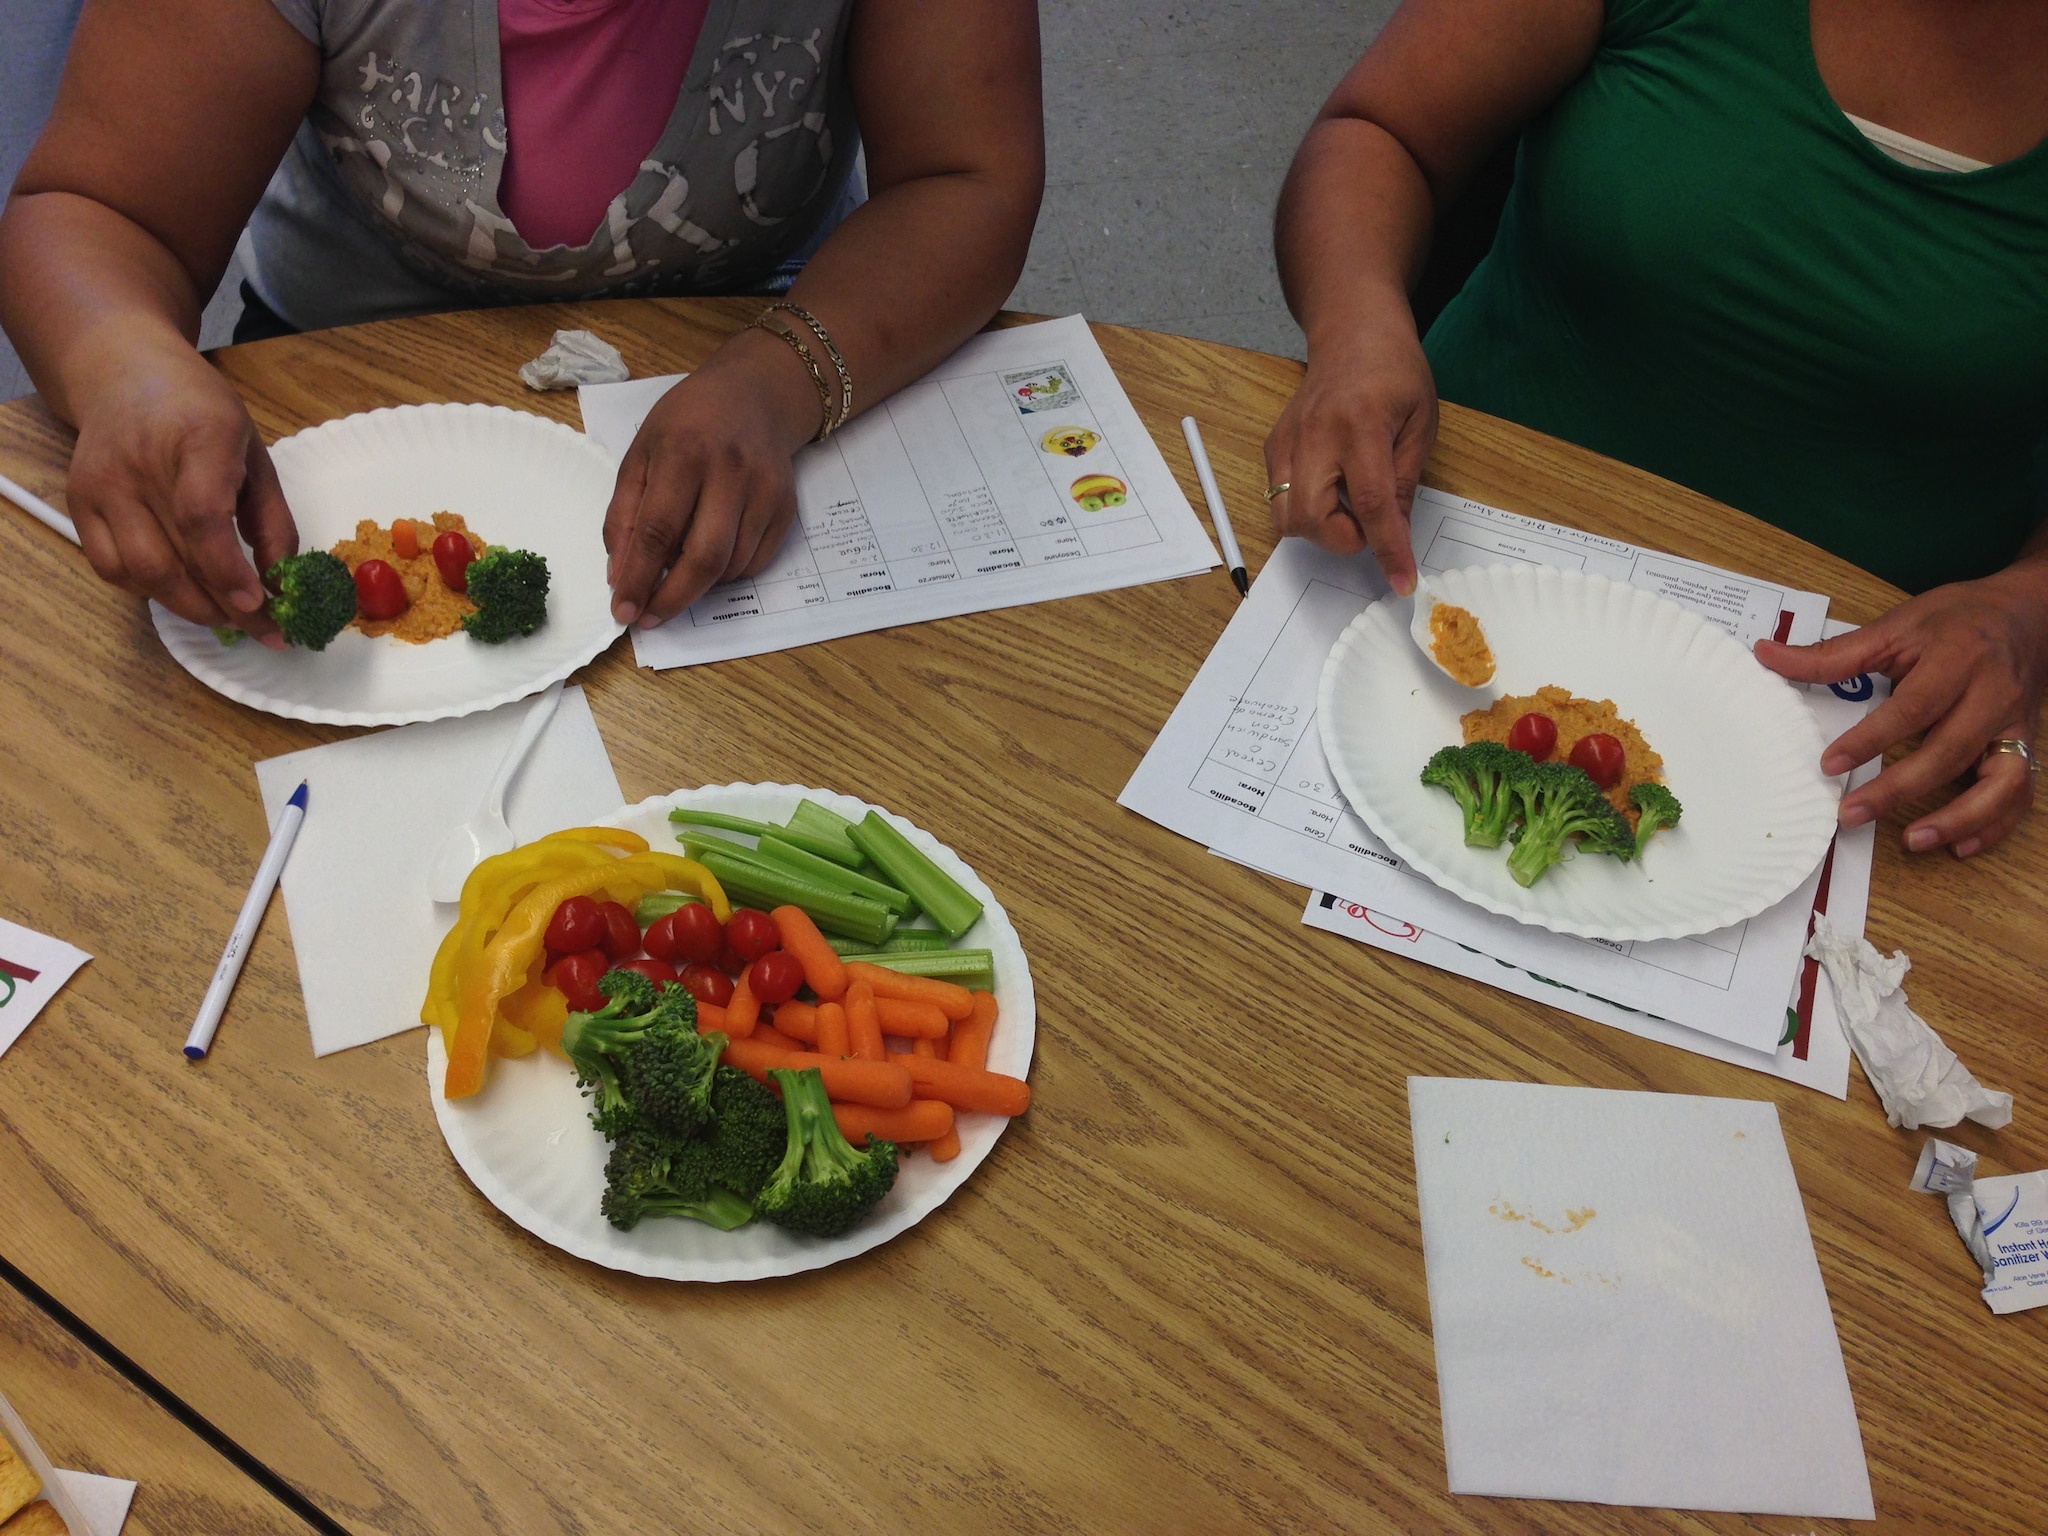 Photograph of a food-preparation activity from a culturally adapted nutrition education program for Mexican-origin families, California’s Central Valley, 2012–2013